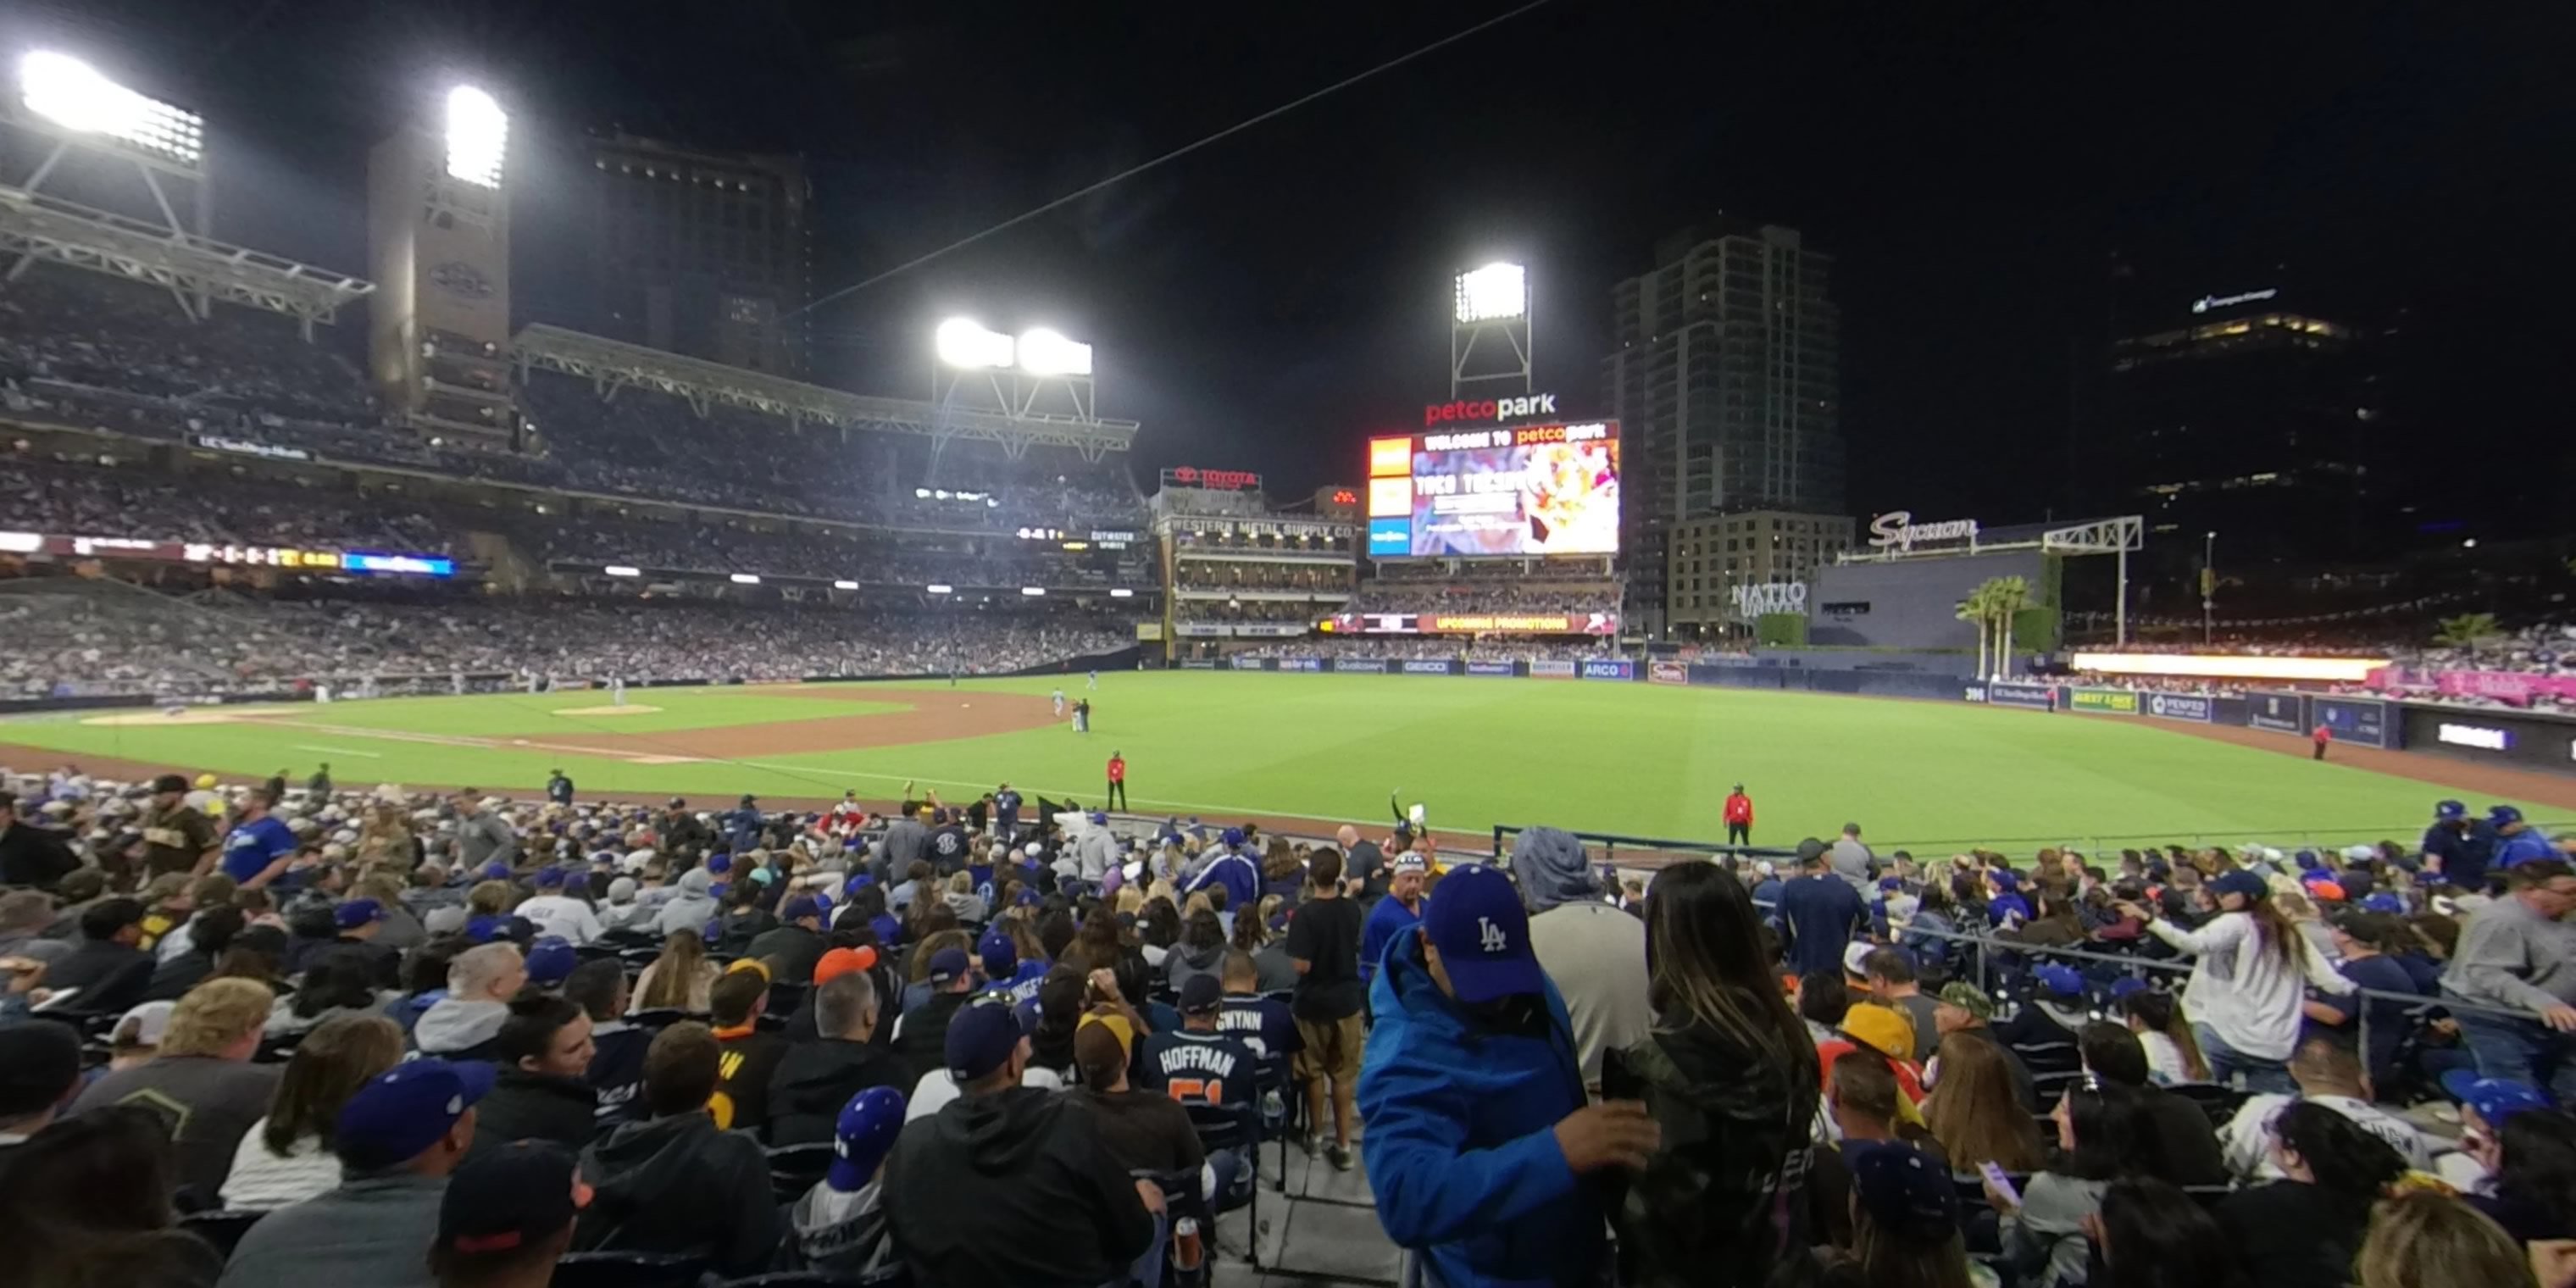 section 117 panoramic seat view  for baseball - petco park